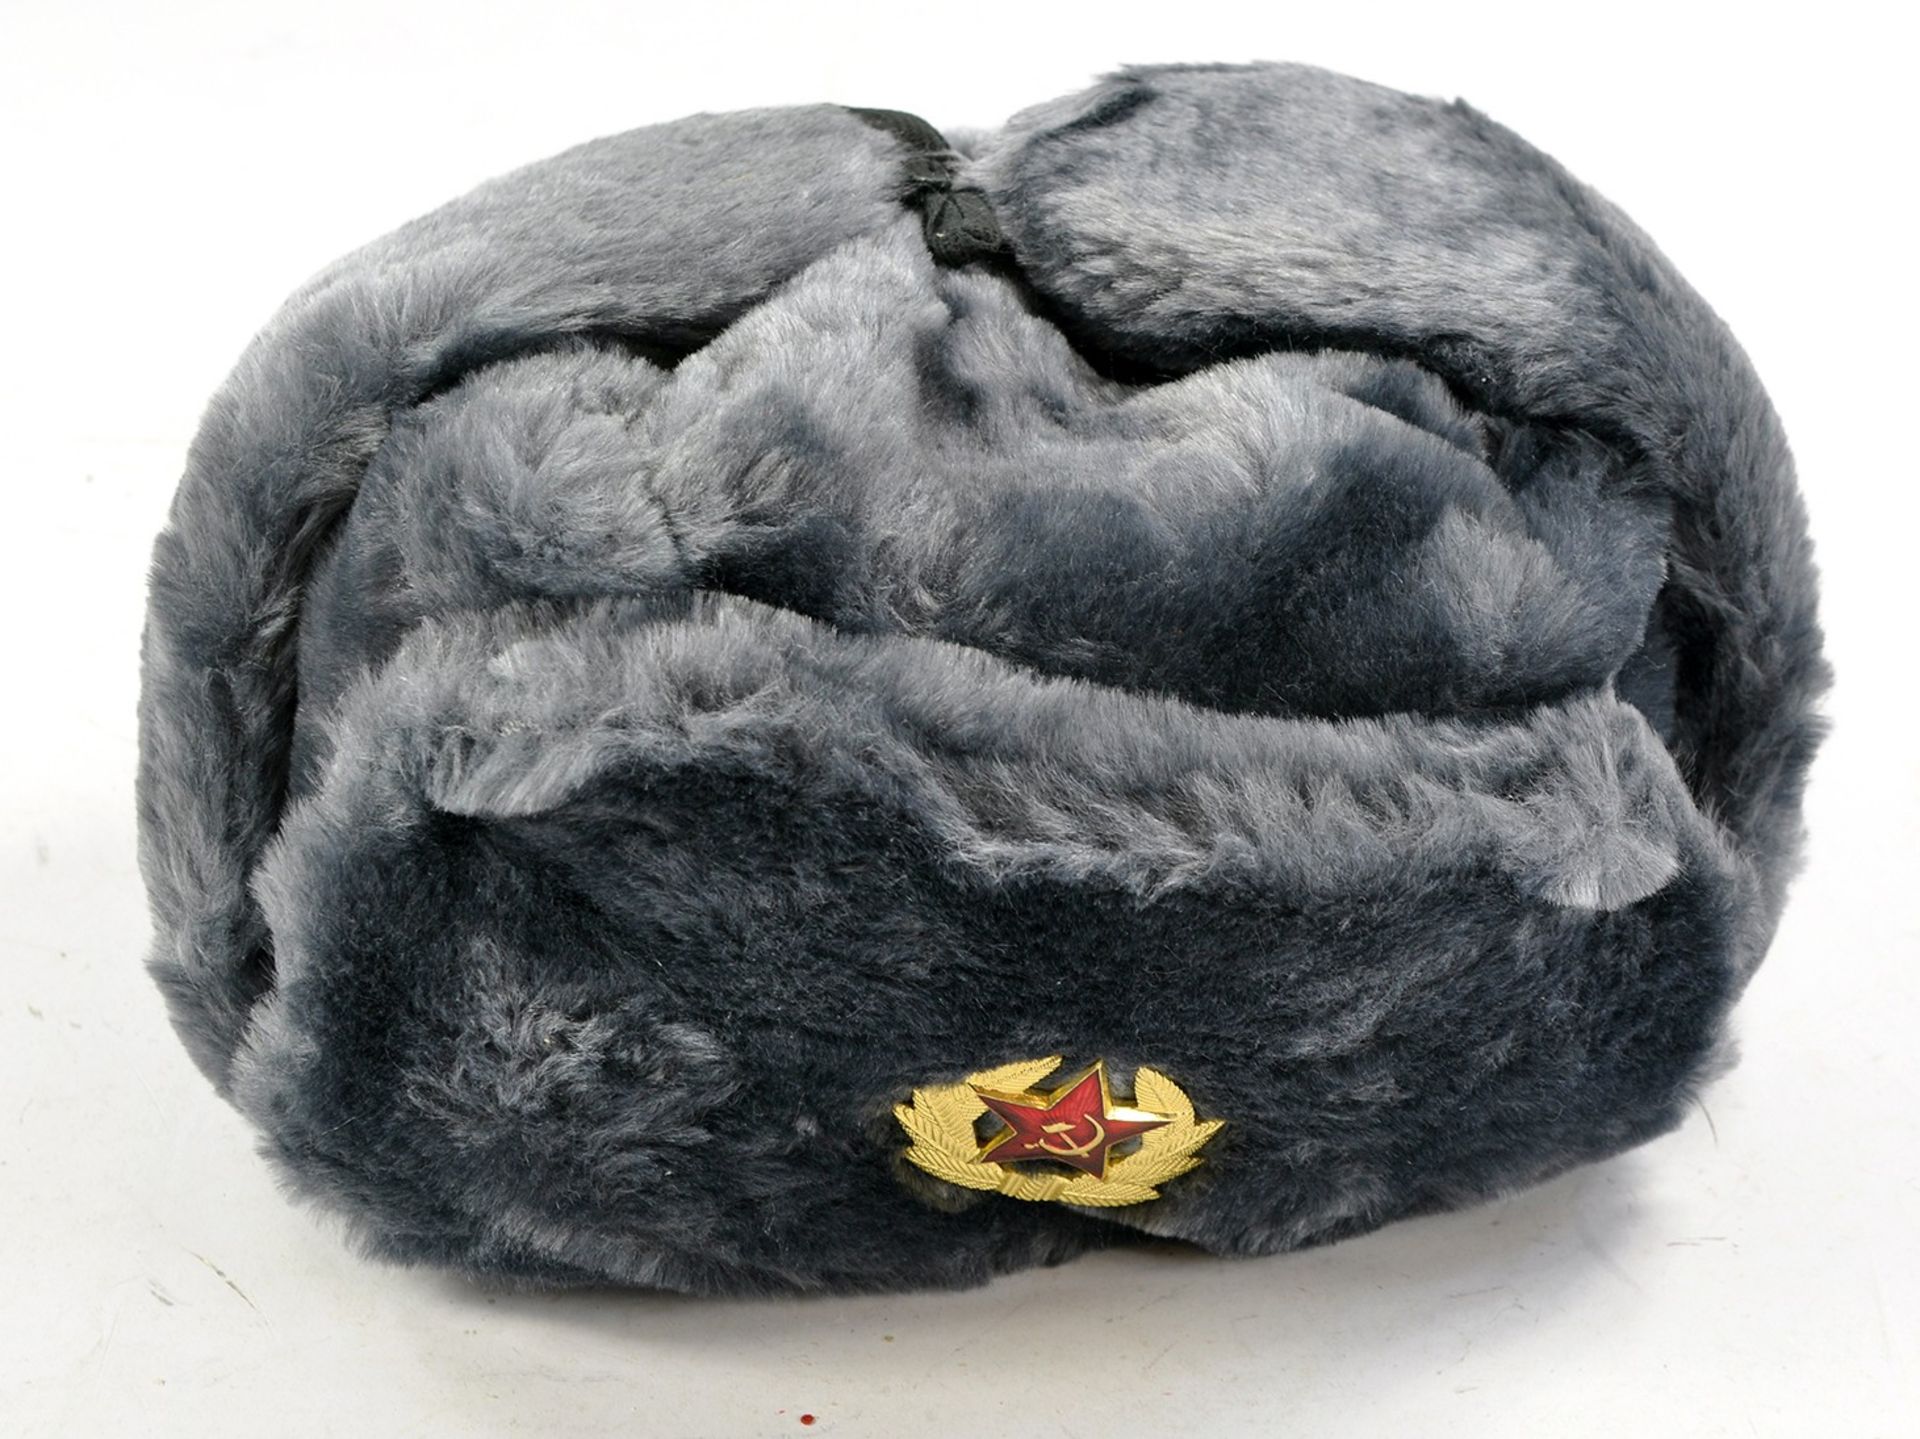 An authentic and vintage Soviet Ushanka as shown.